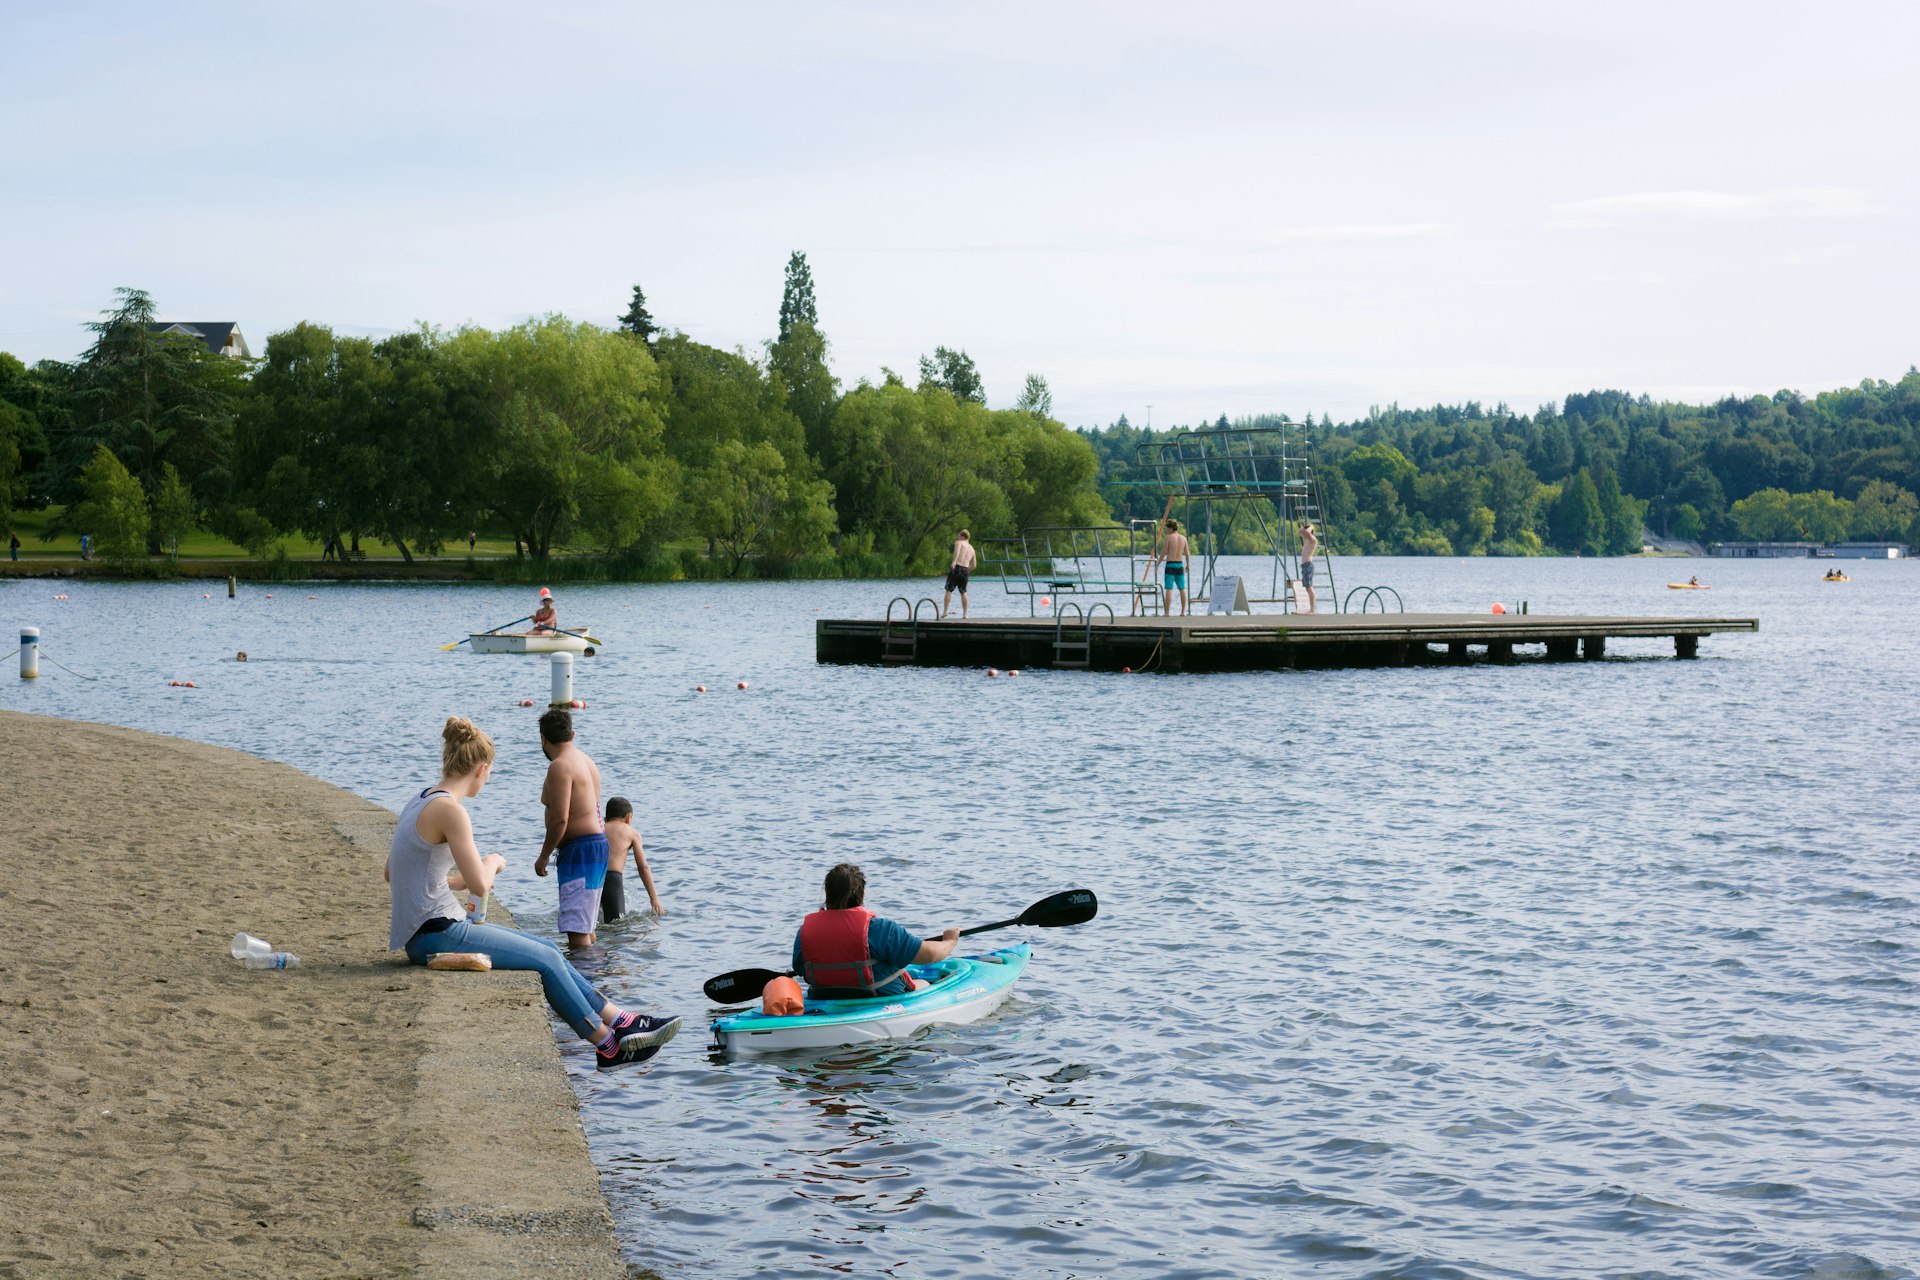 People meander about the water's edge at Green Lake in North Seattle while others play on the dock in the distance or relax in water craft on the lake.